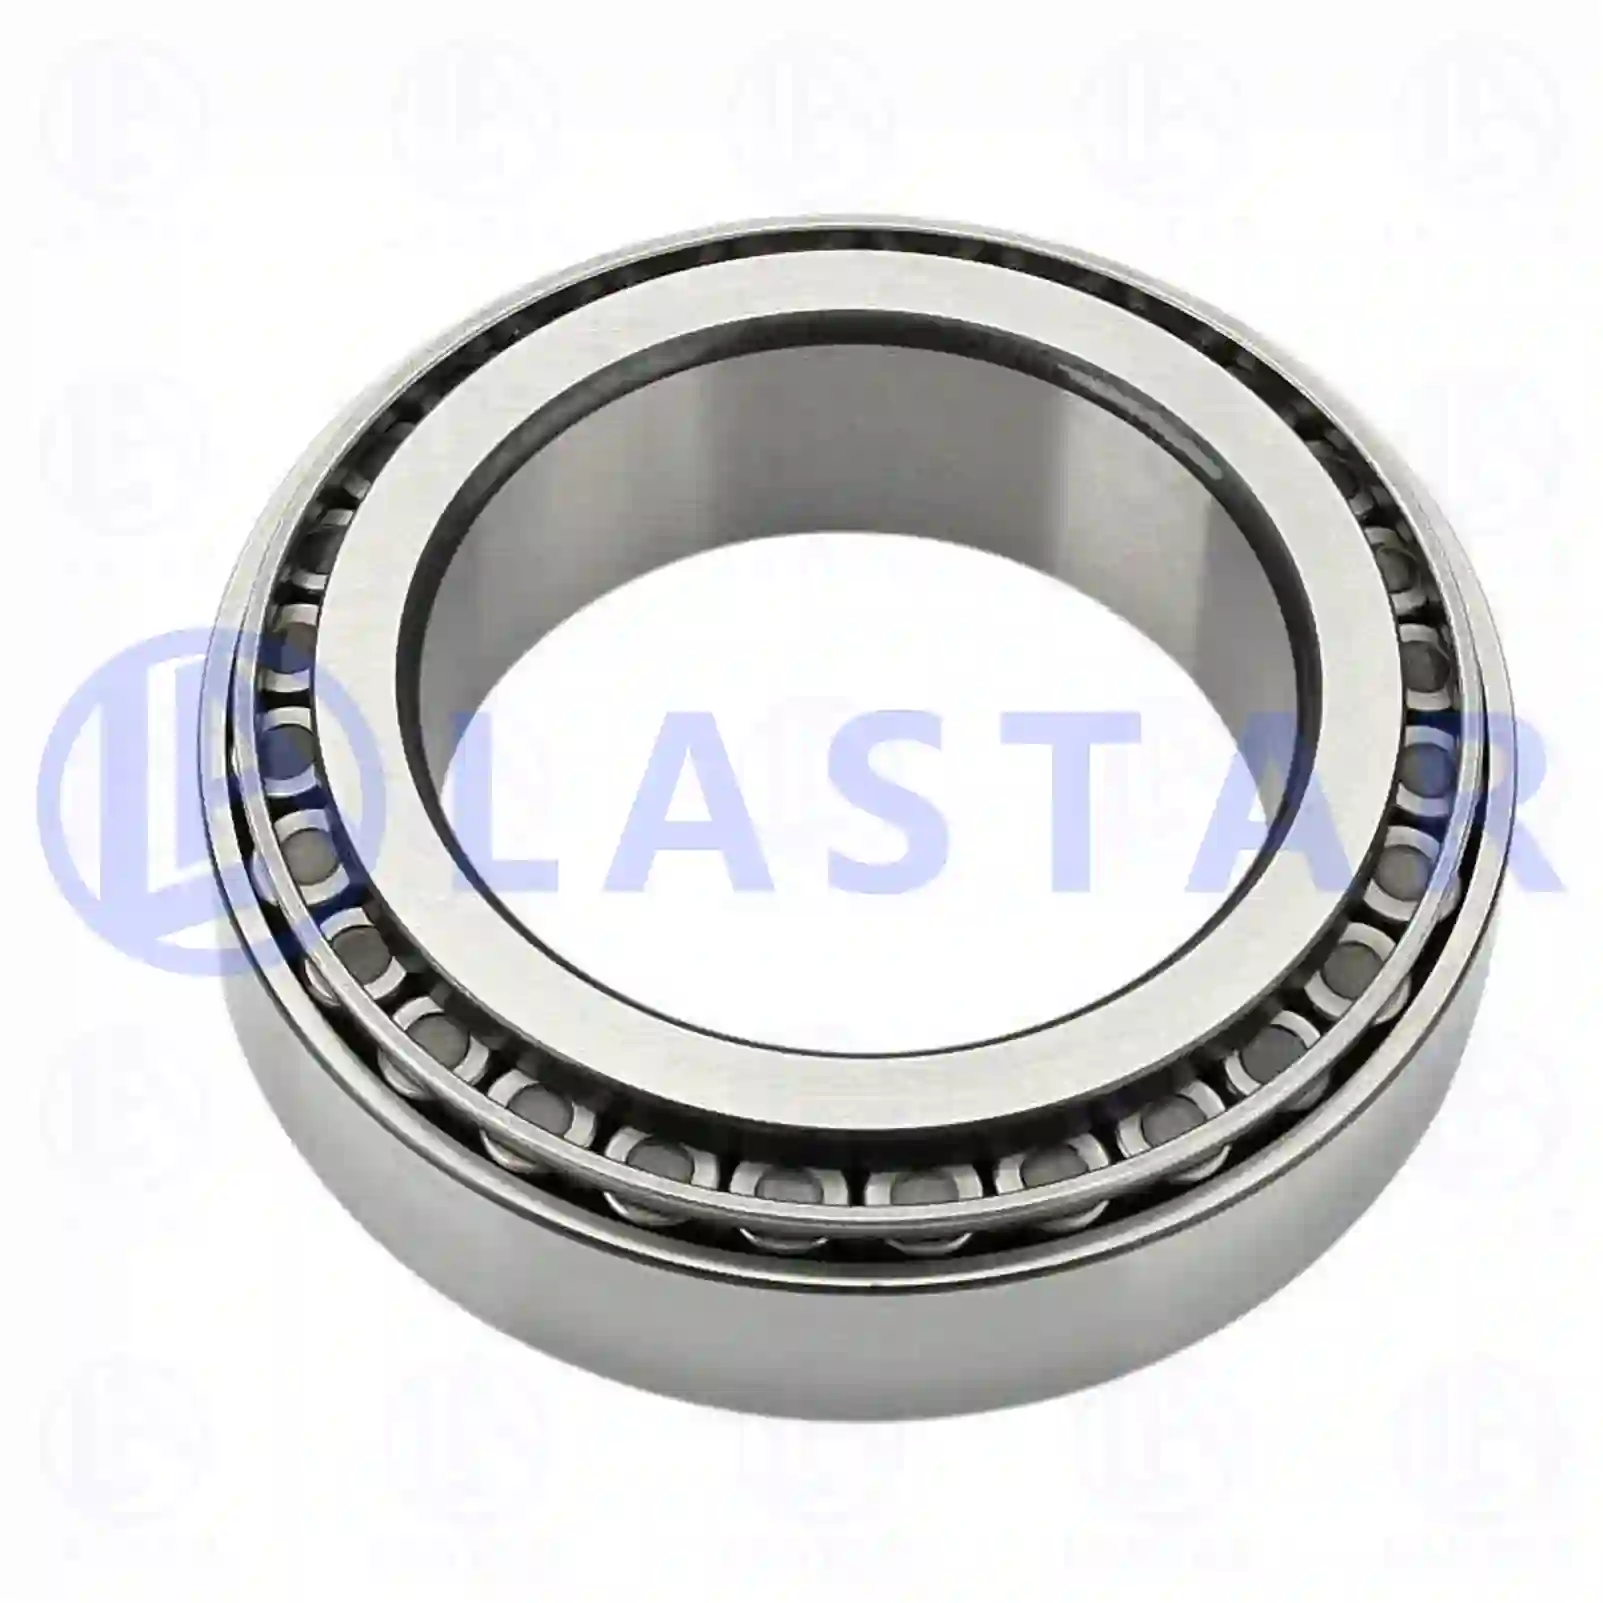 Hub Tapered roller bearing, la no: 77726074 ,  oem no:0266488, 266488, 41800341, 41800341, 06324990096, 0009809702, 0009819702, 0039812605, 0039812805, 0059814905, 0959443021, 5010319057, 5010443751, 5010443791, 5010534617, 351713, 3152068, 7174946, ZG03025-0008 Lastar Spare Part | Truck Spare Parts, Auotomotive Spare Parts